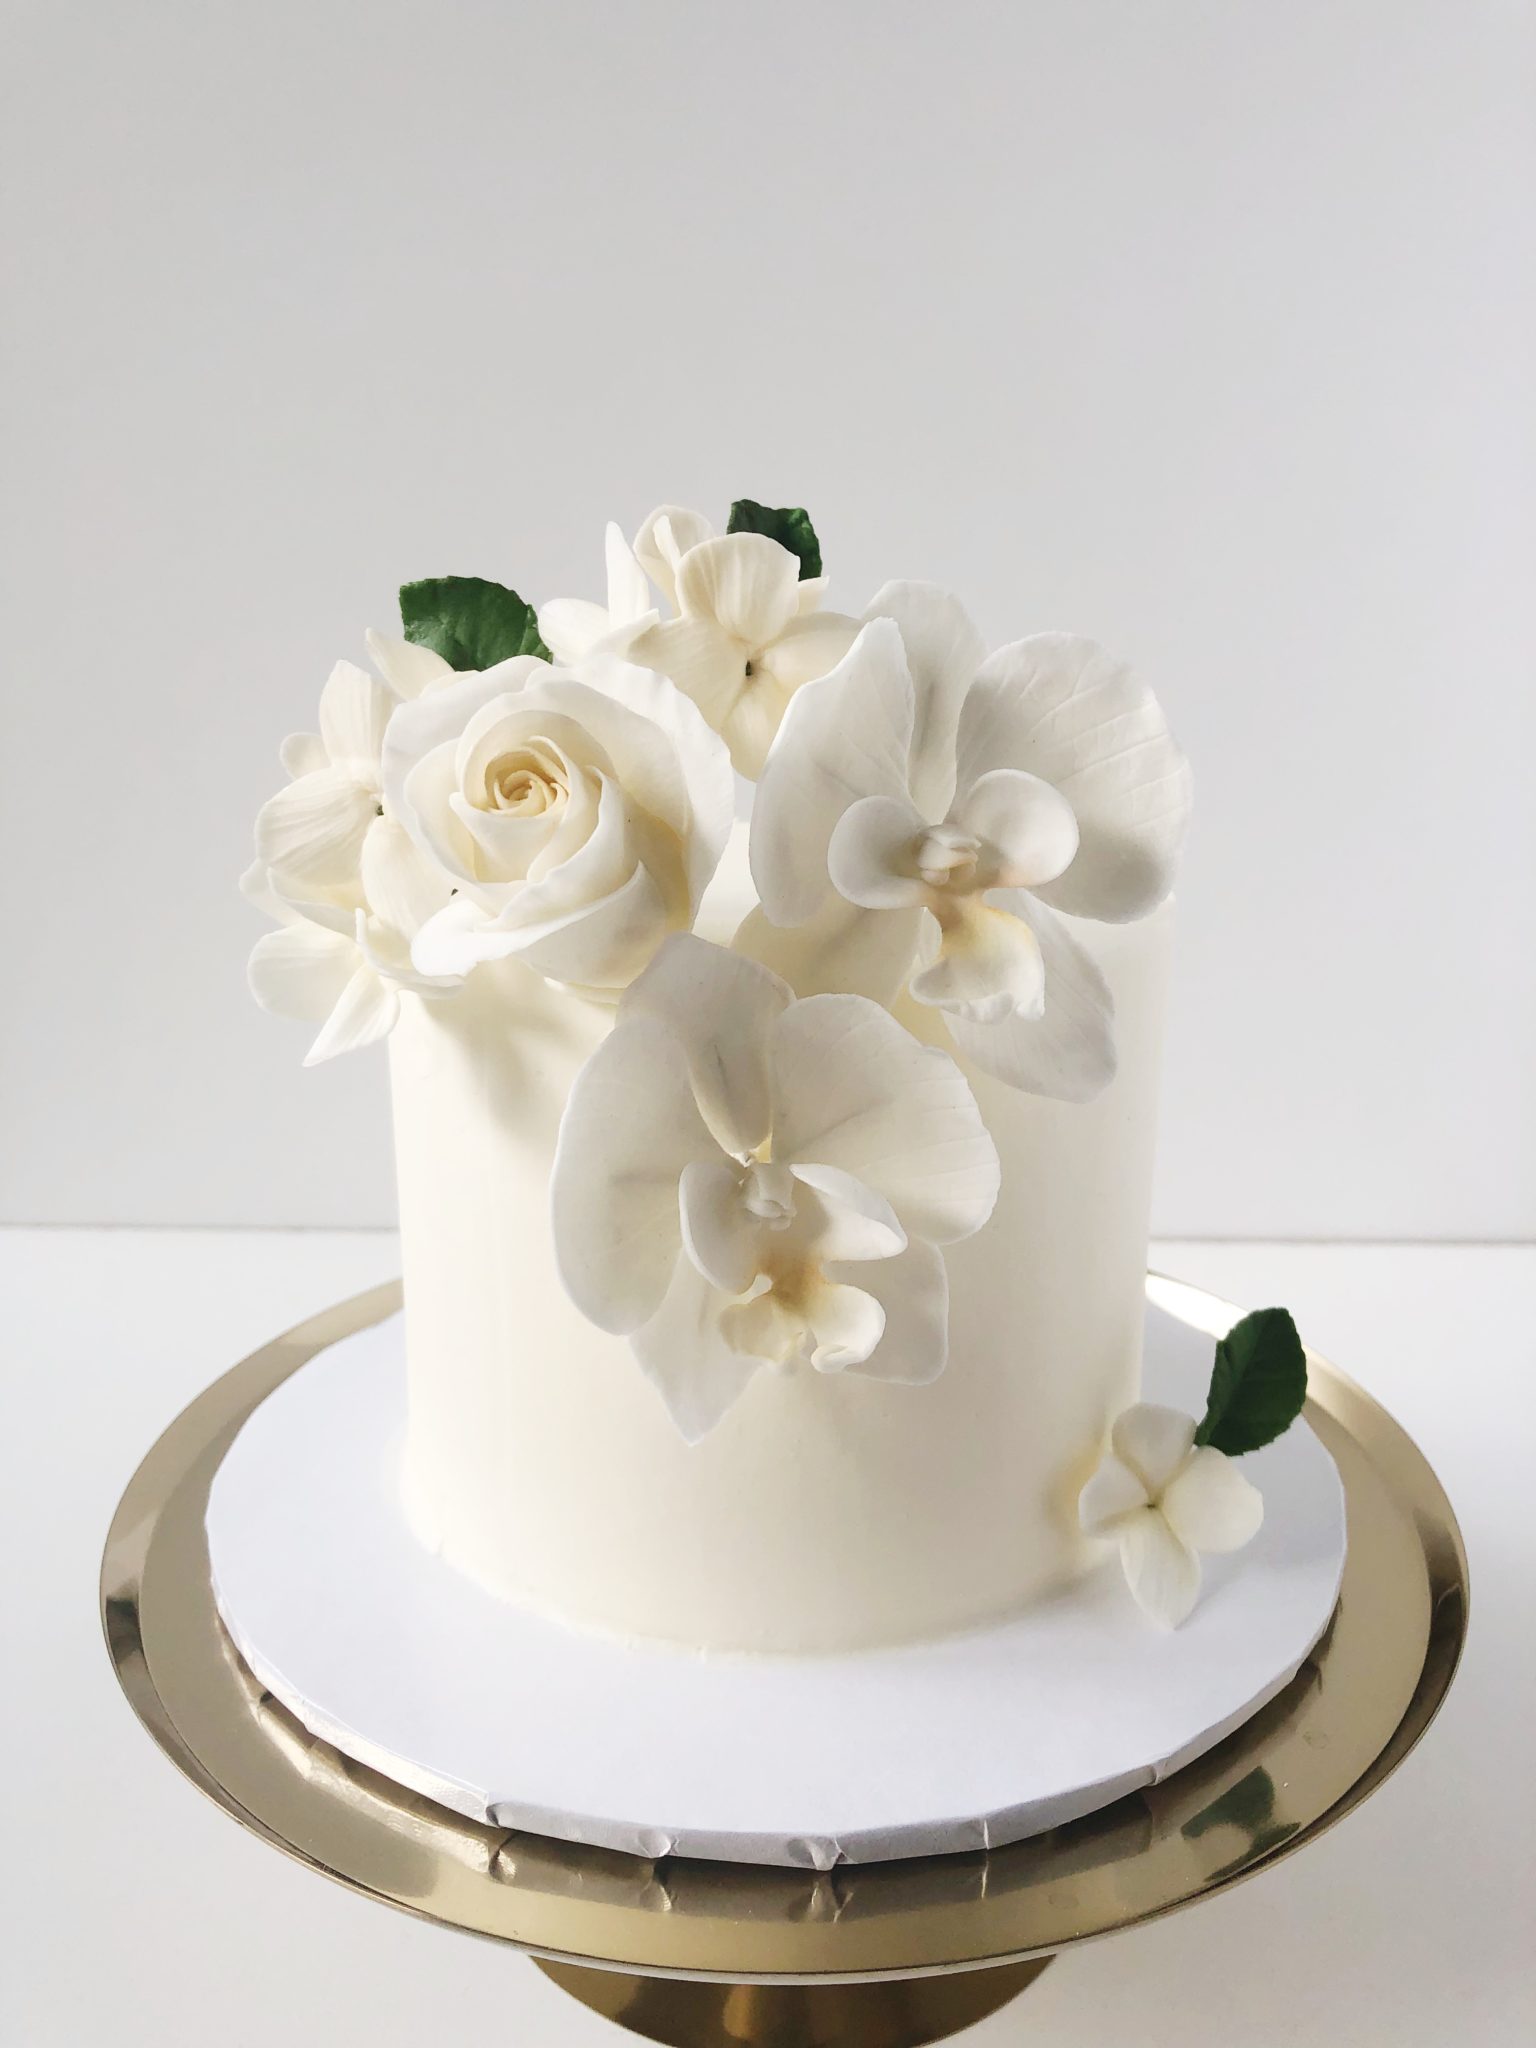 Sugar orchids on a white single-tier wedding cake